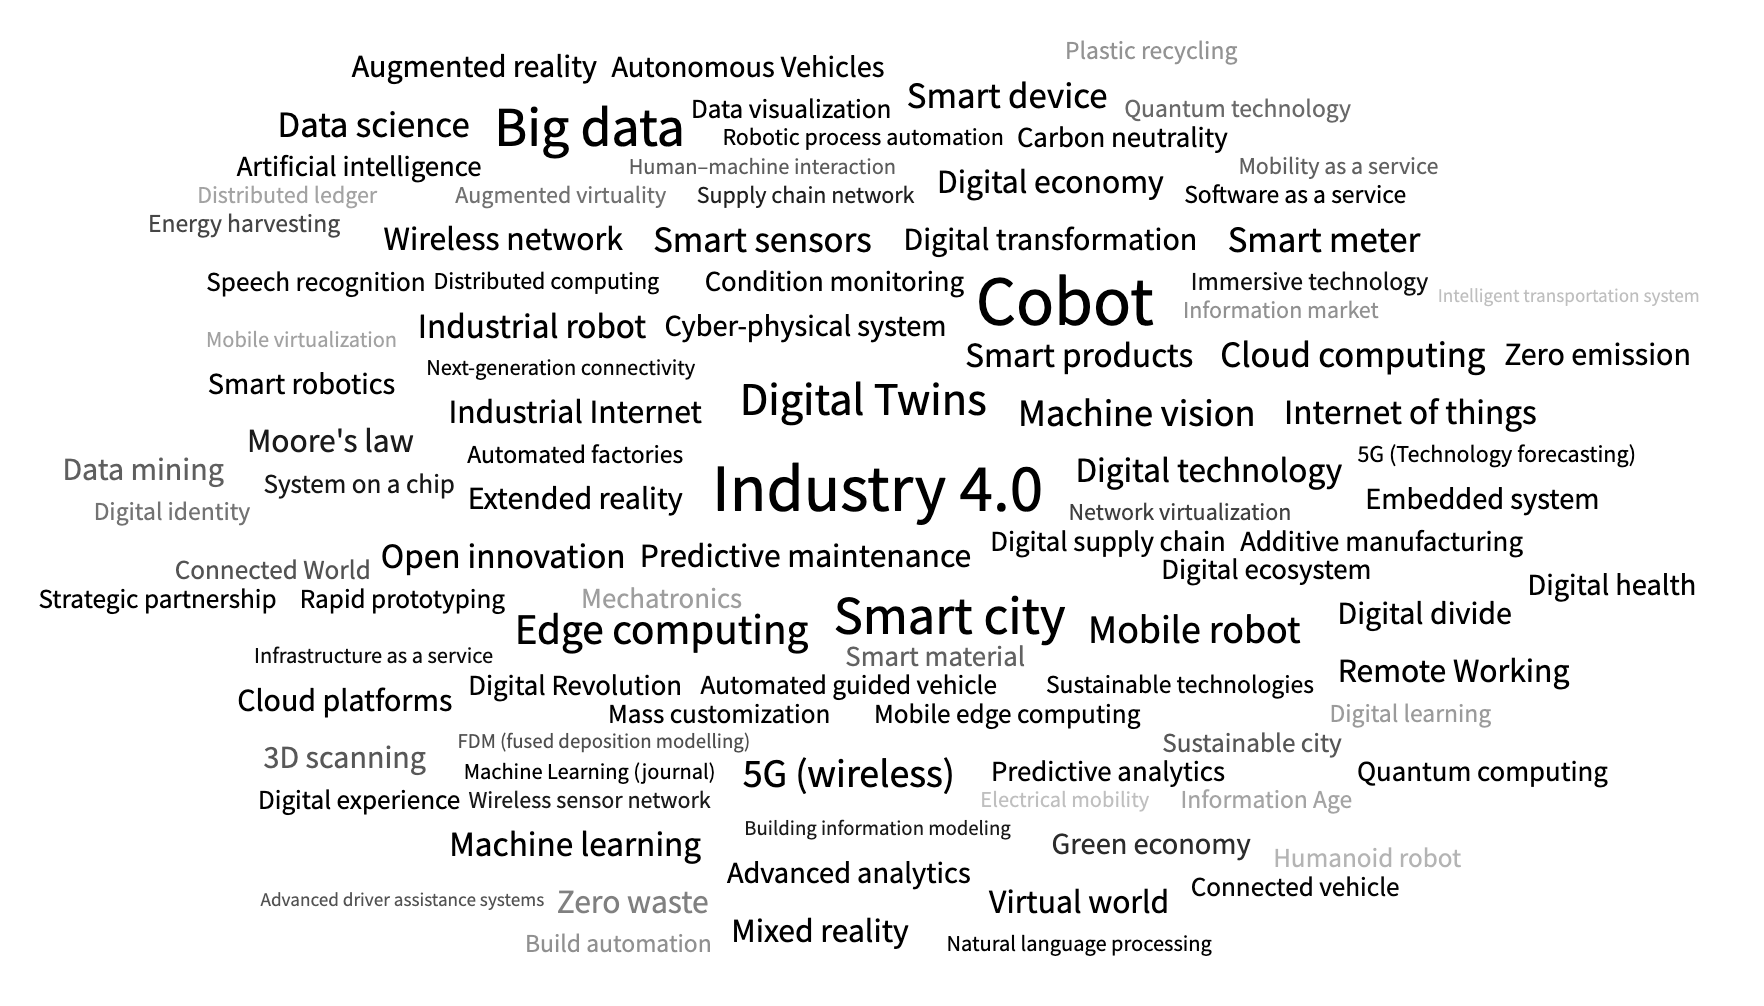 Discover the latest trends using our AI-powered Trends Wordcloud